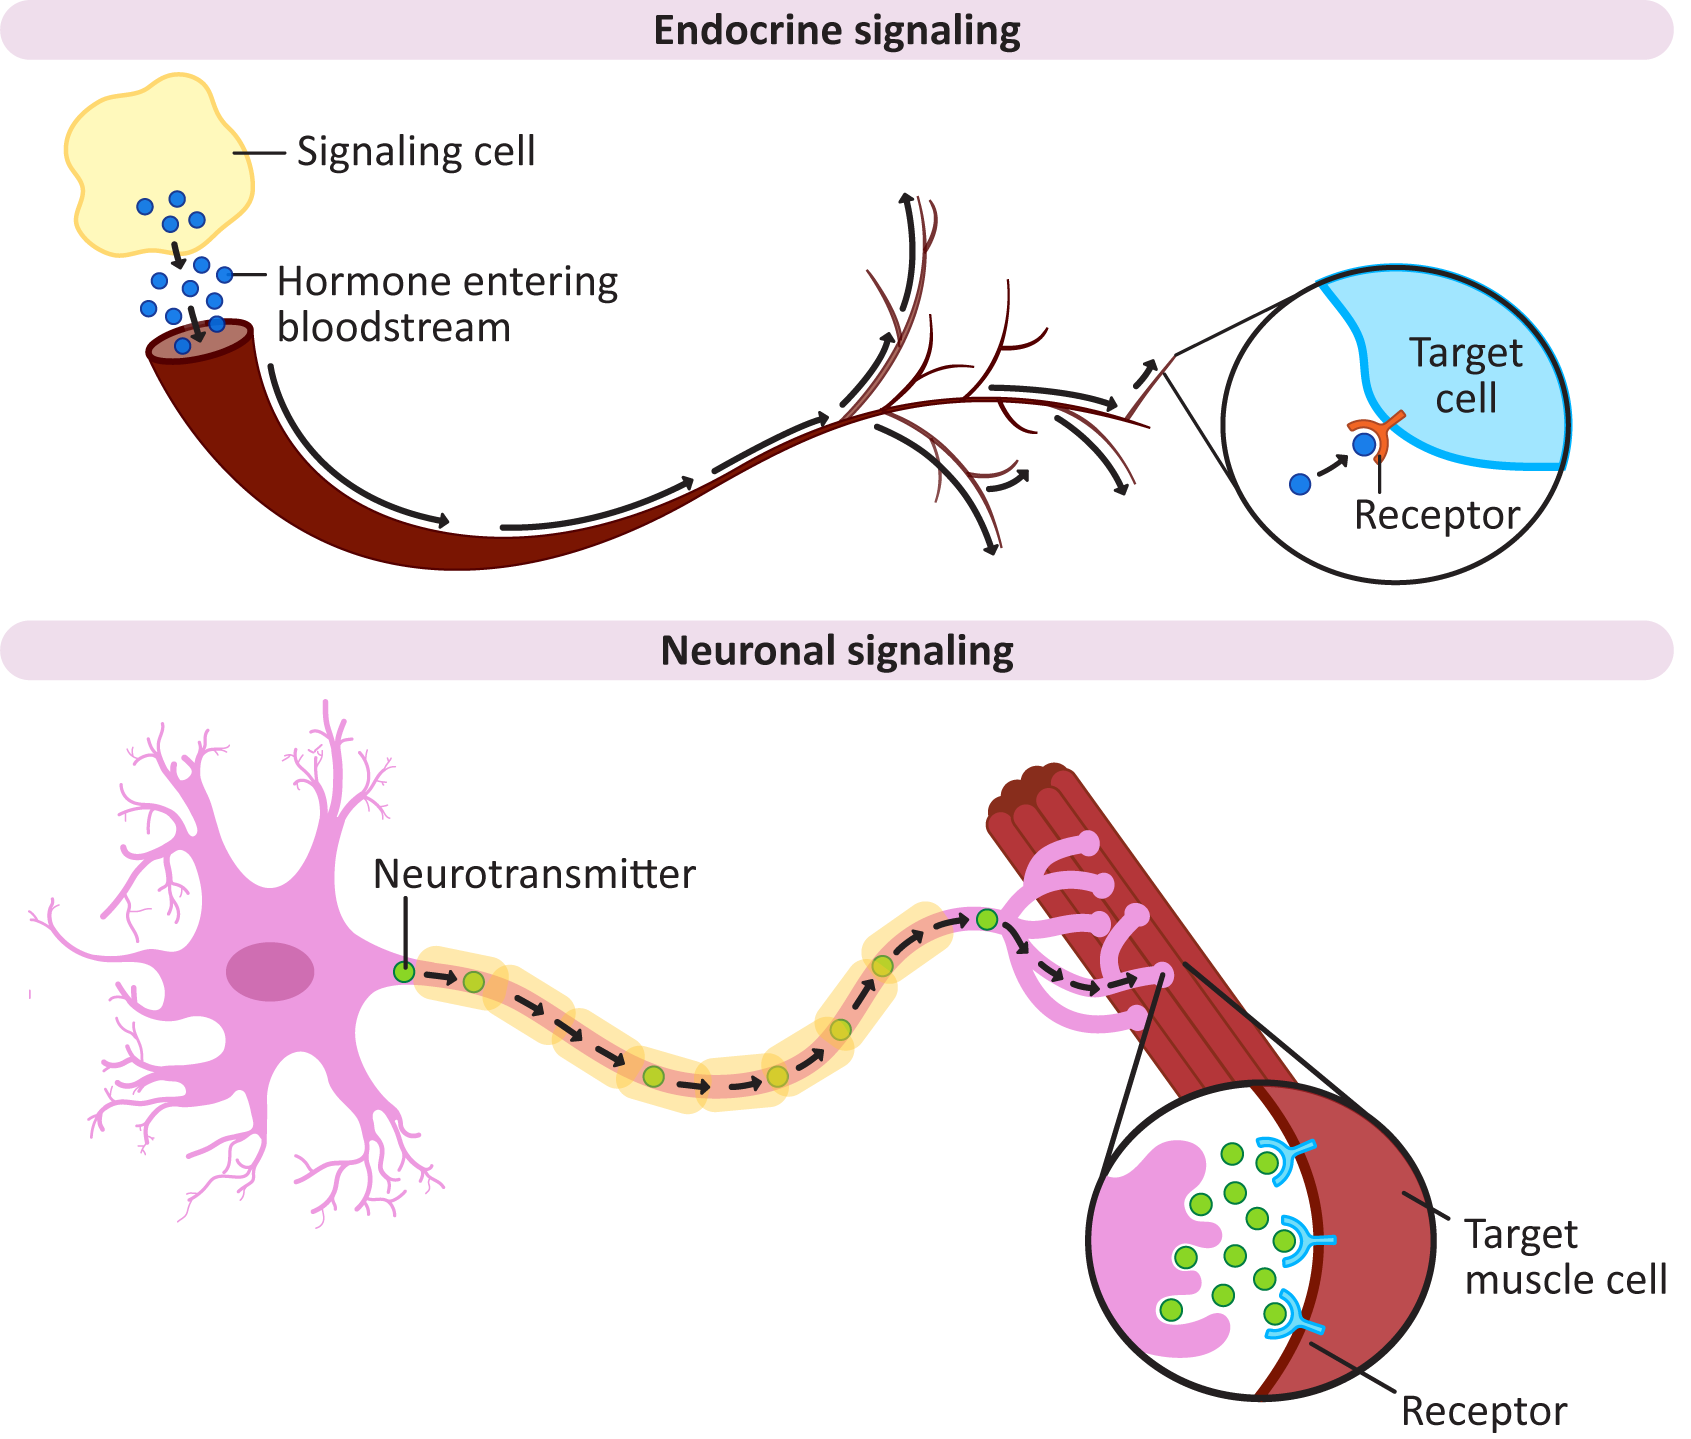 Examples of long distance signaling: neuronal and endocrine